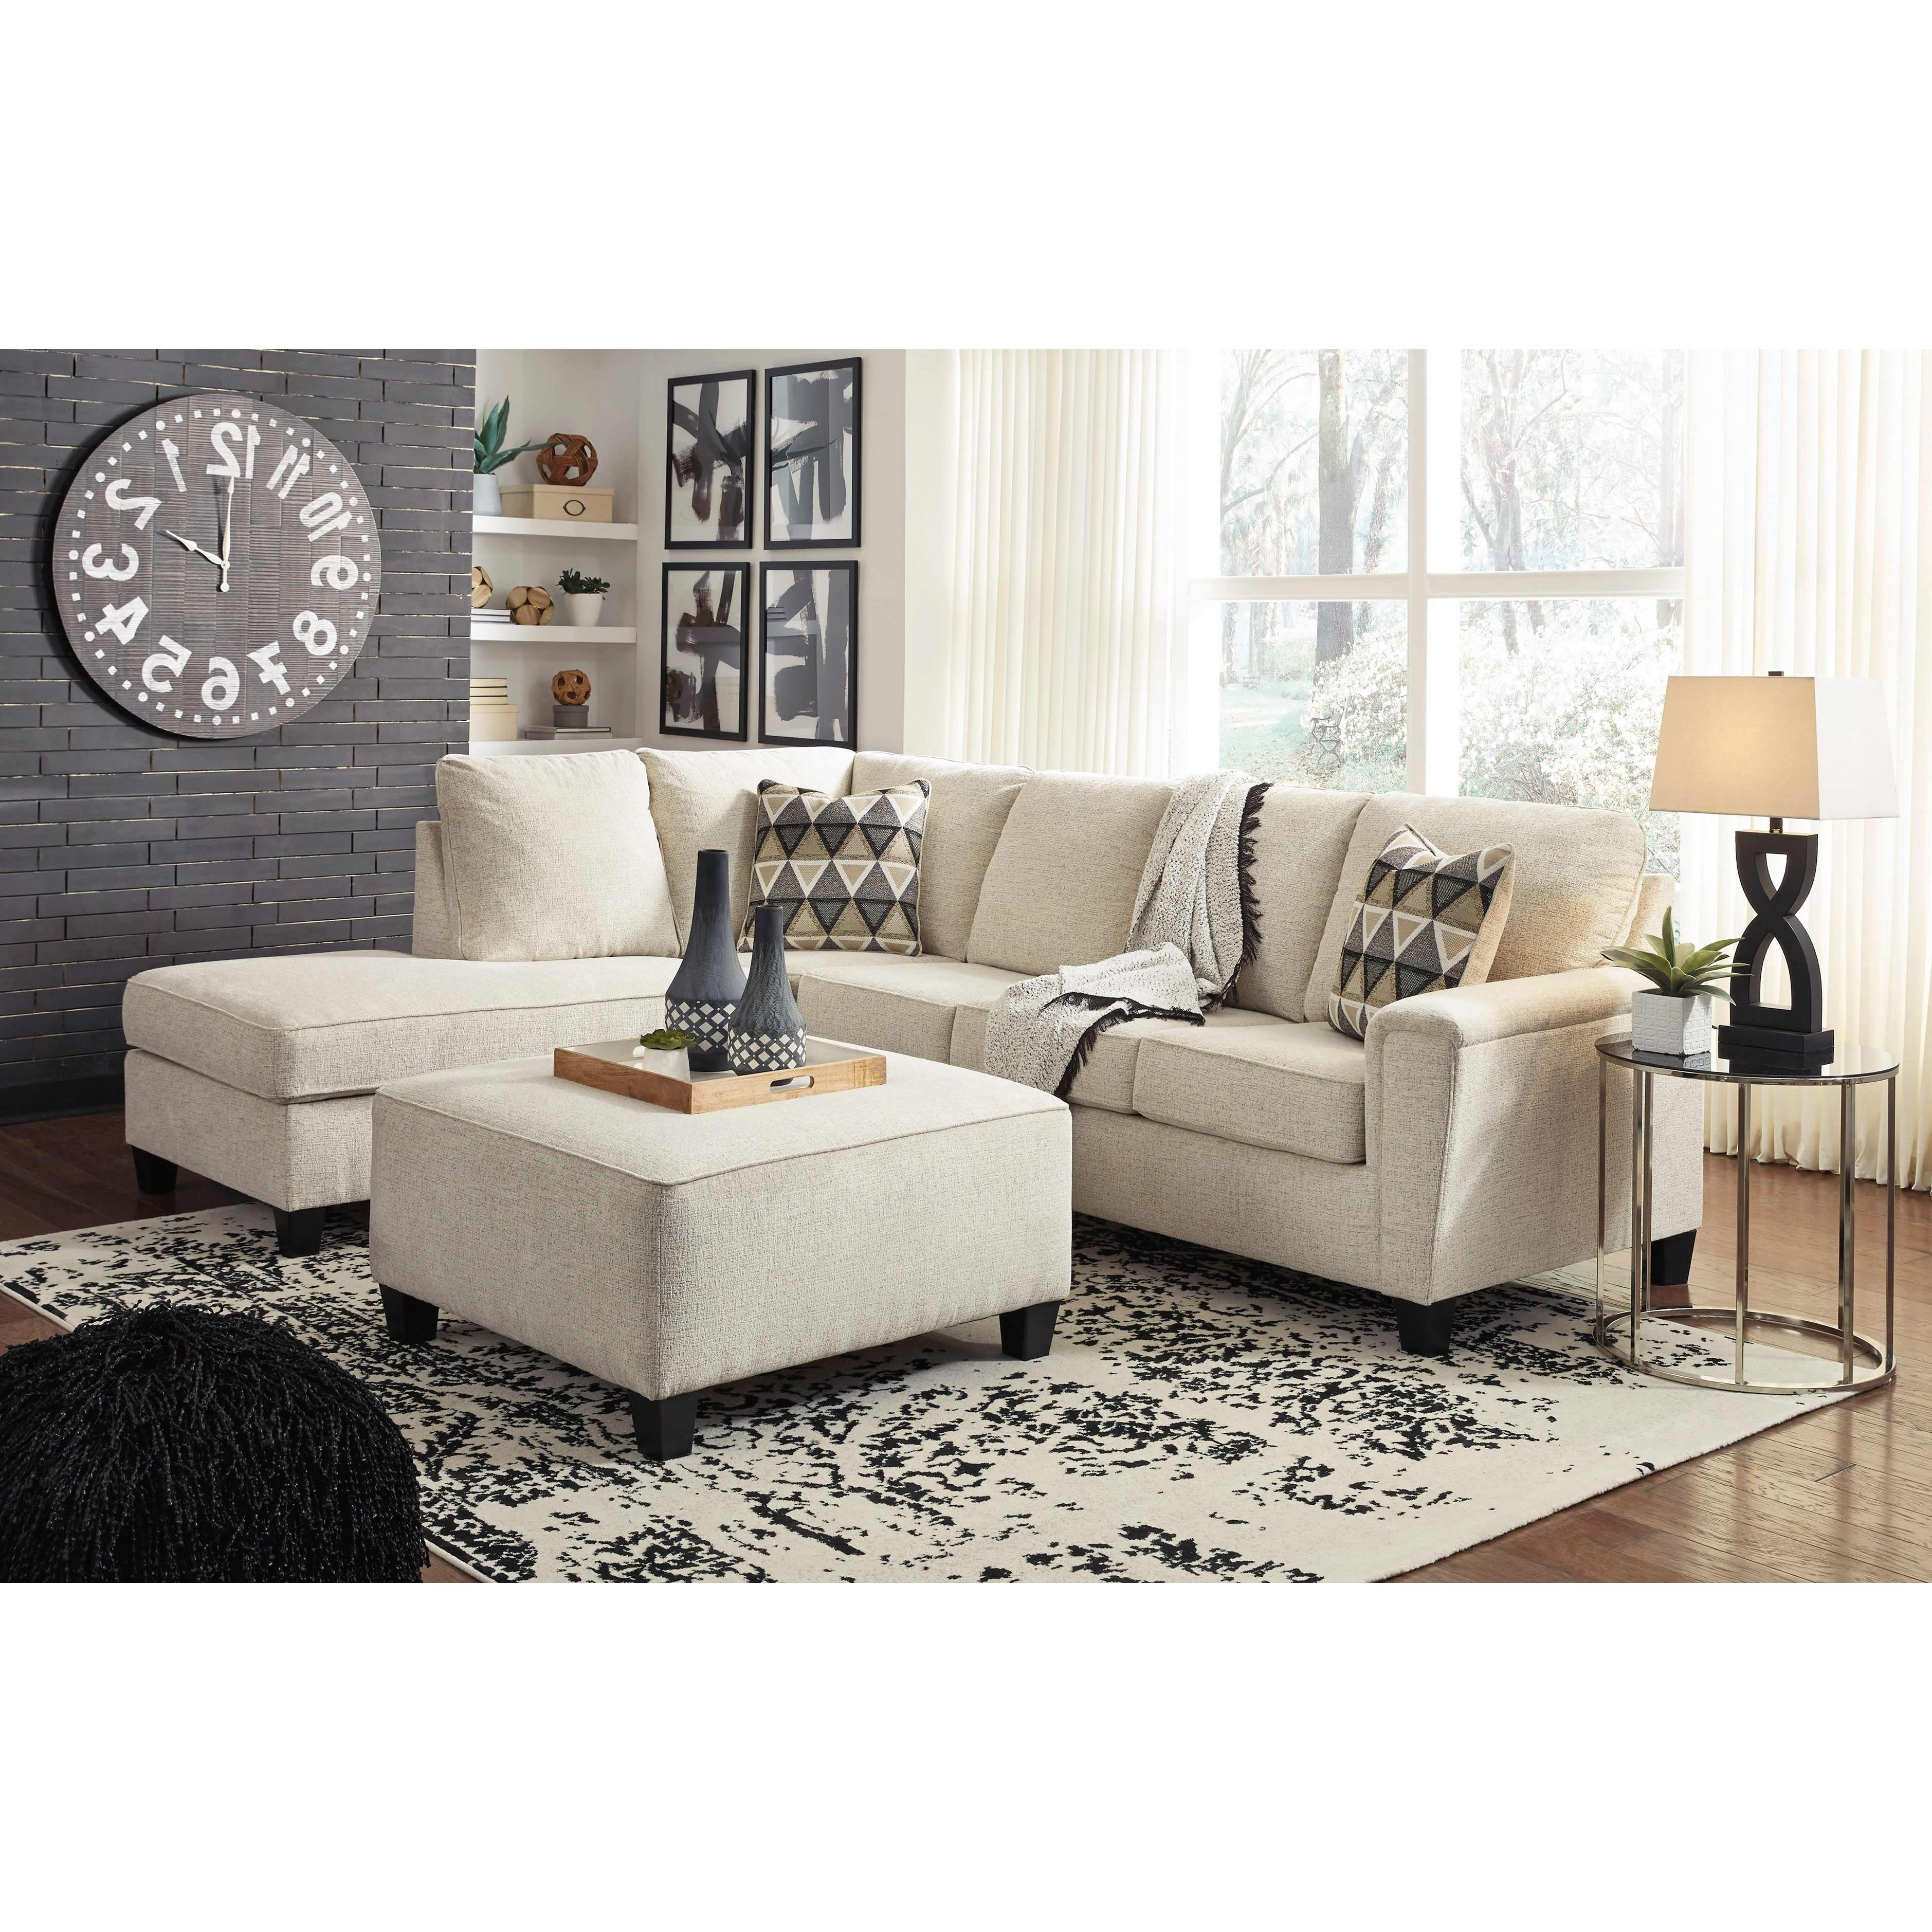 Signature Design by Ashley Abinger Fabric Queen Sleeper Sectional 8390416/8390470 IMAGE 8